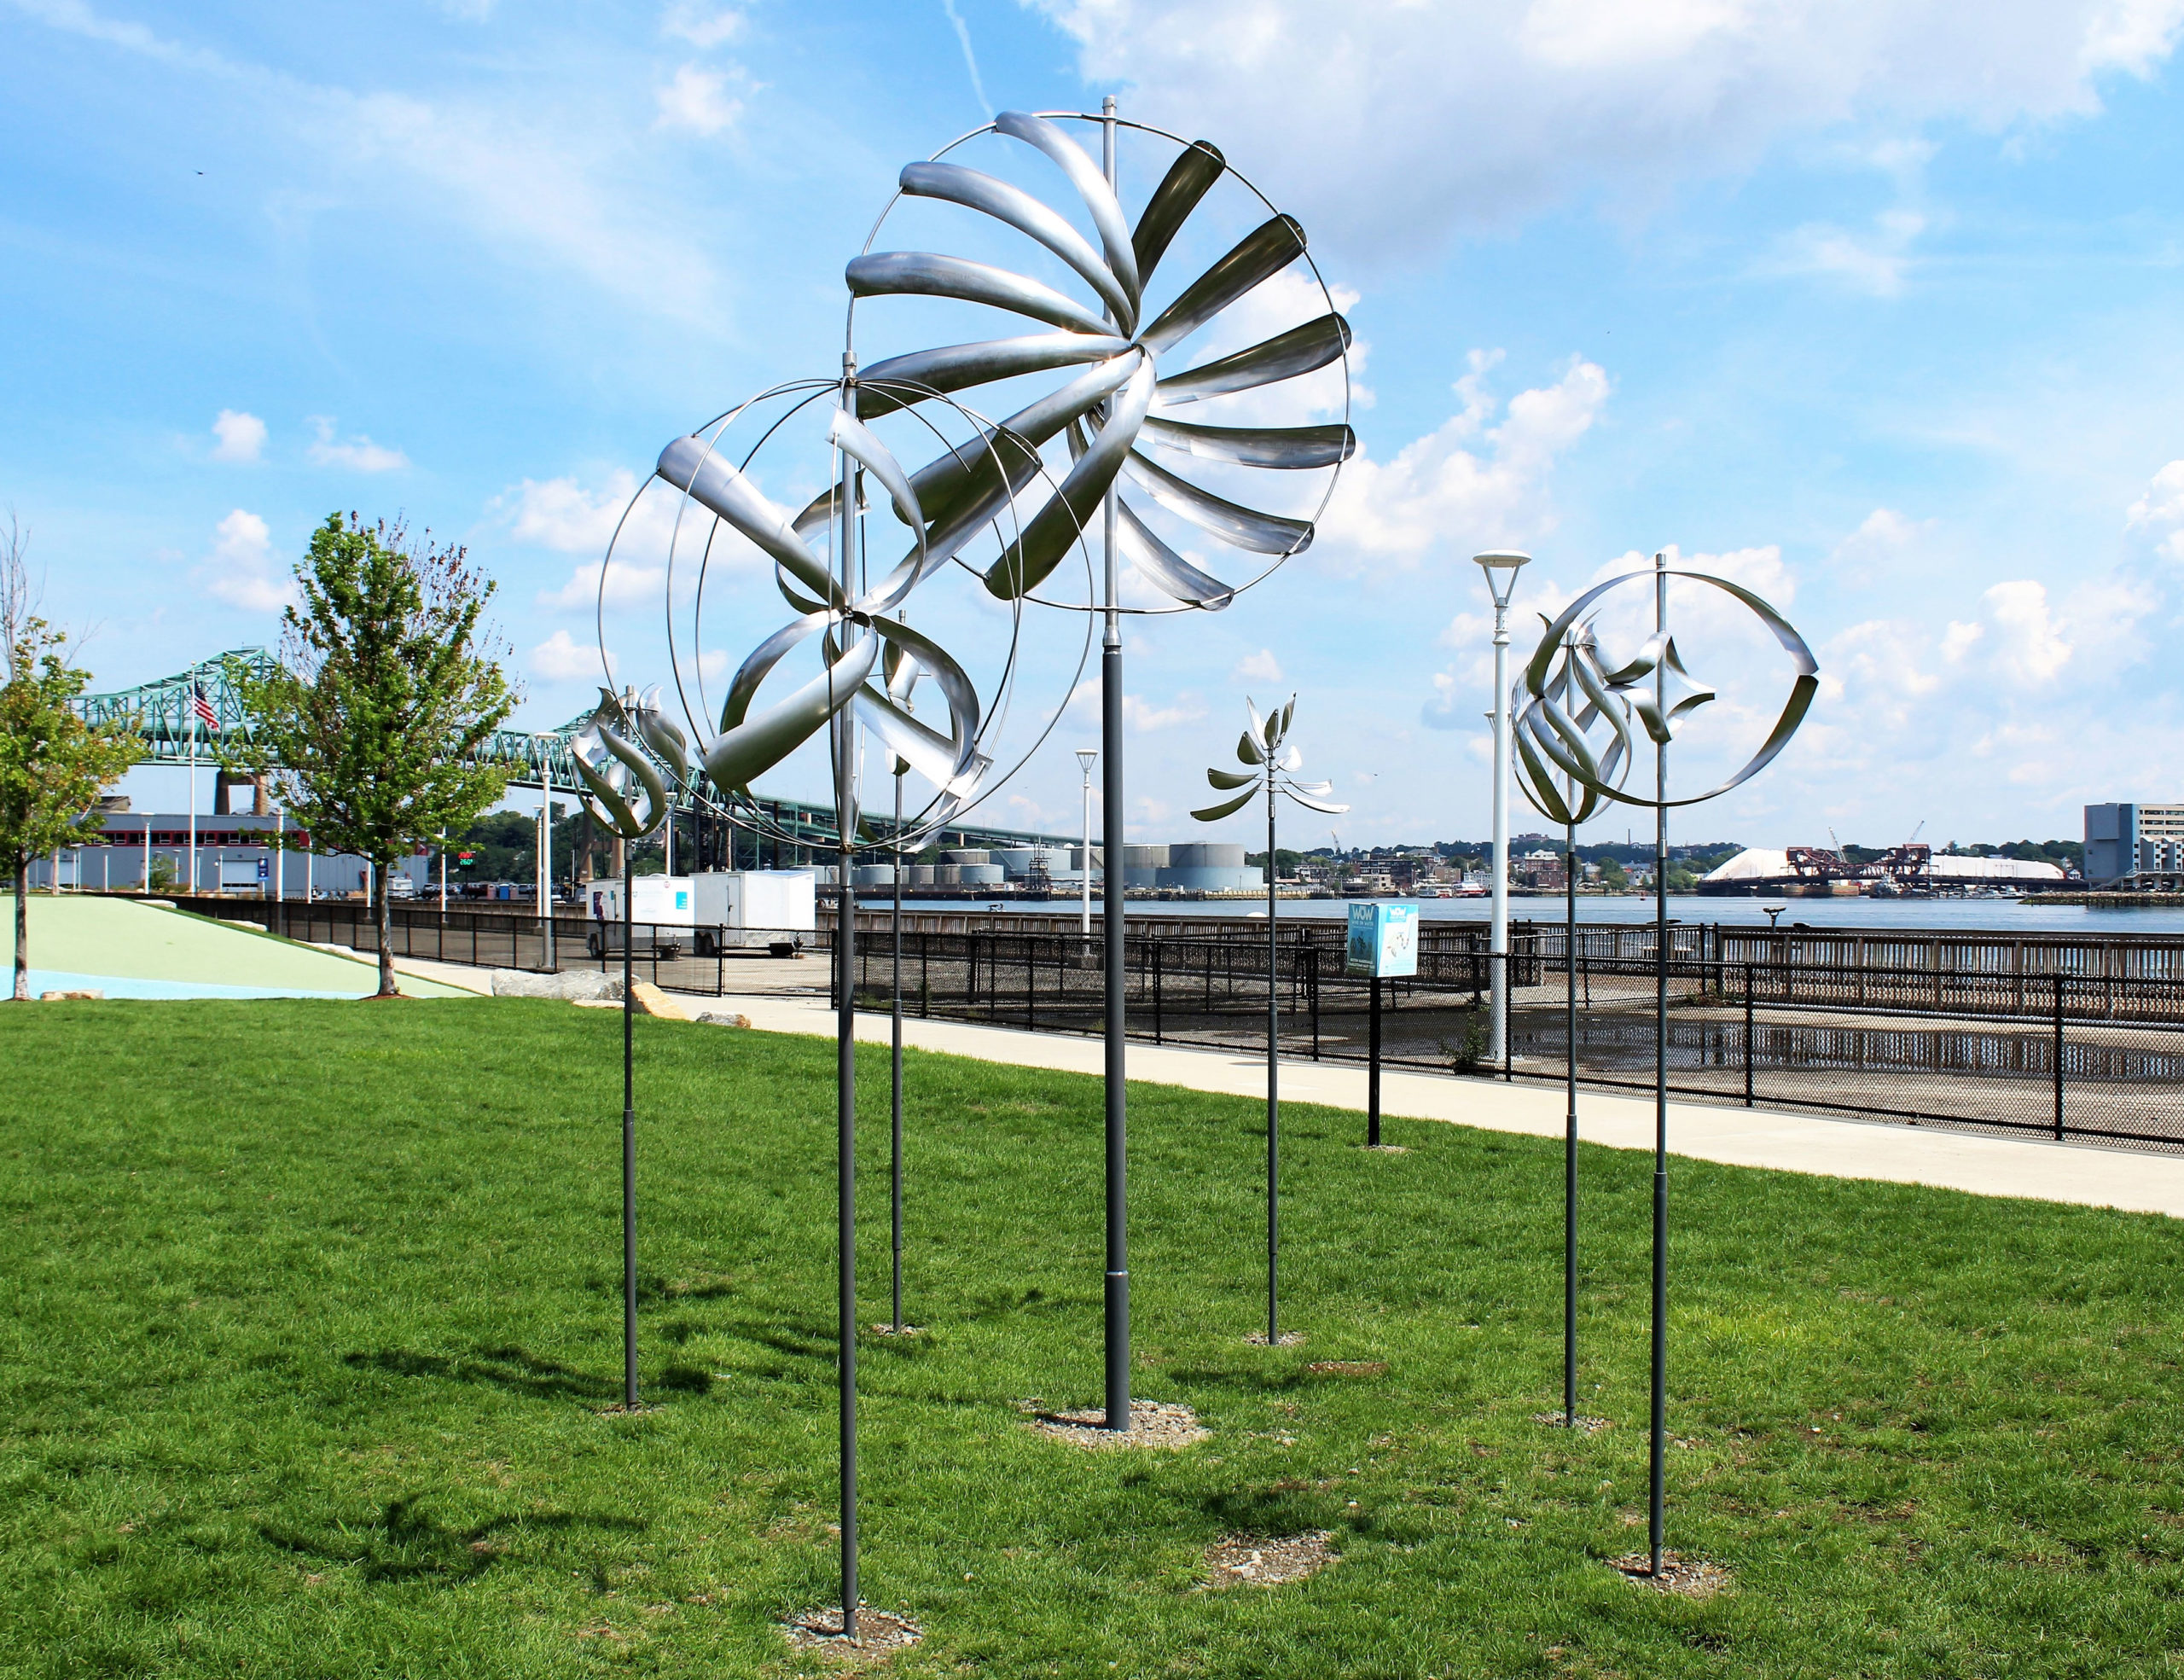 WOW: Wind On Water Wind Sculptures Exhibit by Lyman Whitaker provides Respite during Pandemic